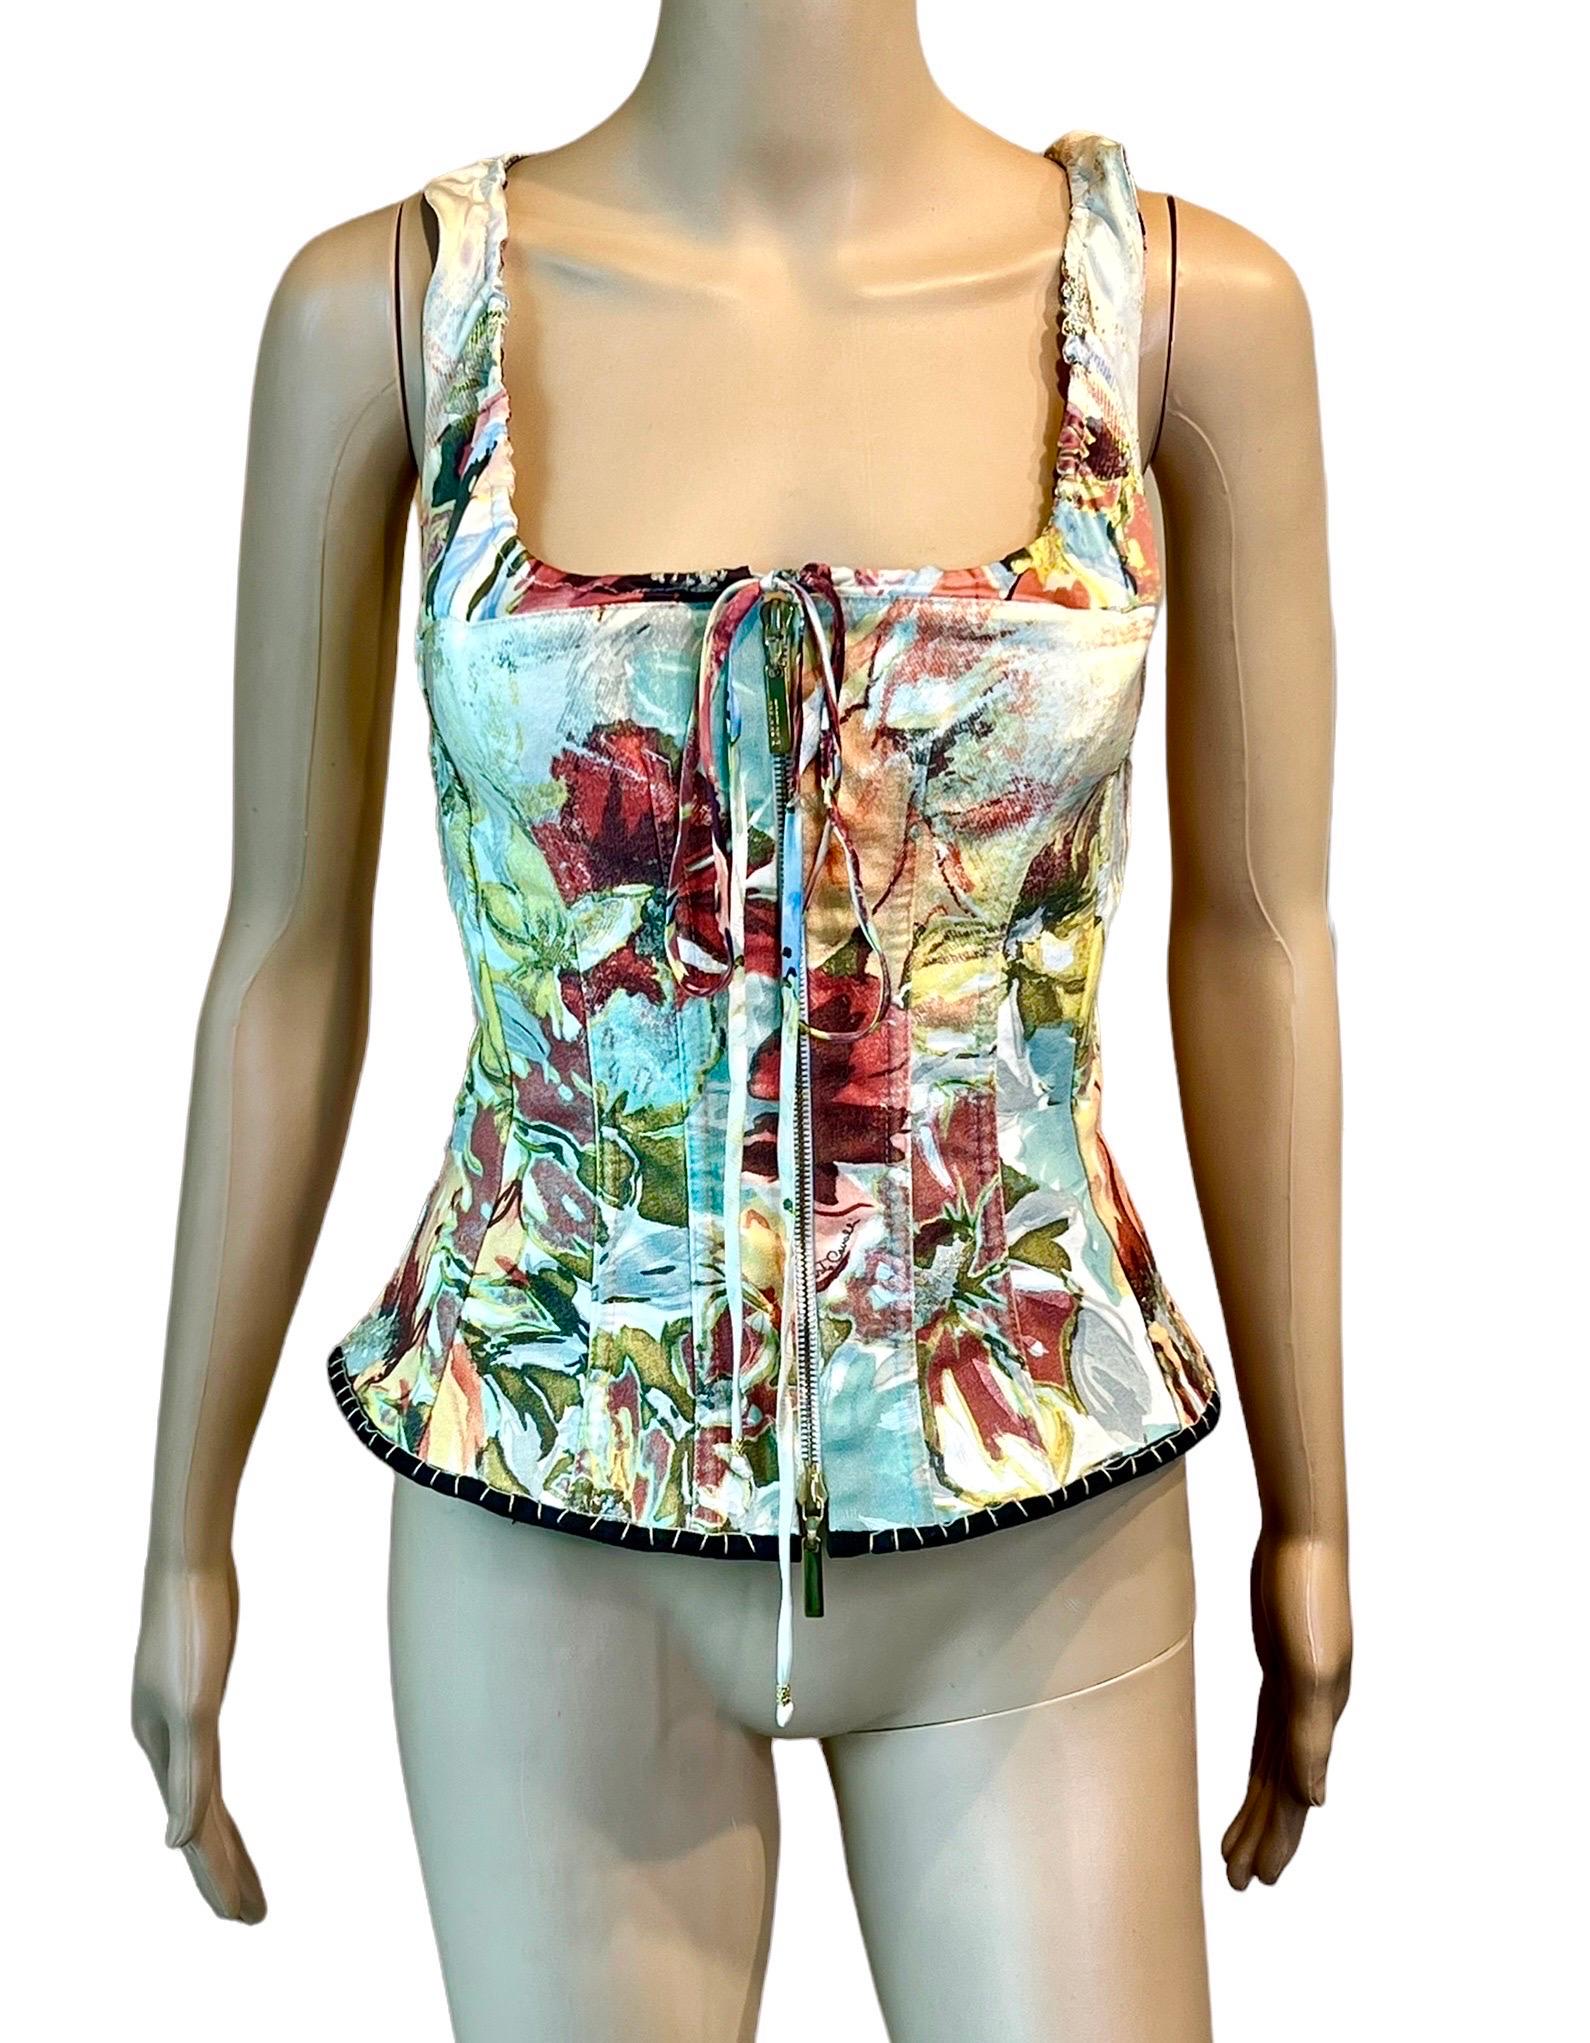 Roberto Cavalli S/S 2003 Bustier Corset Floral Abstract Print Denim Silk Top For Sale 3